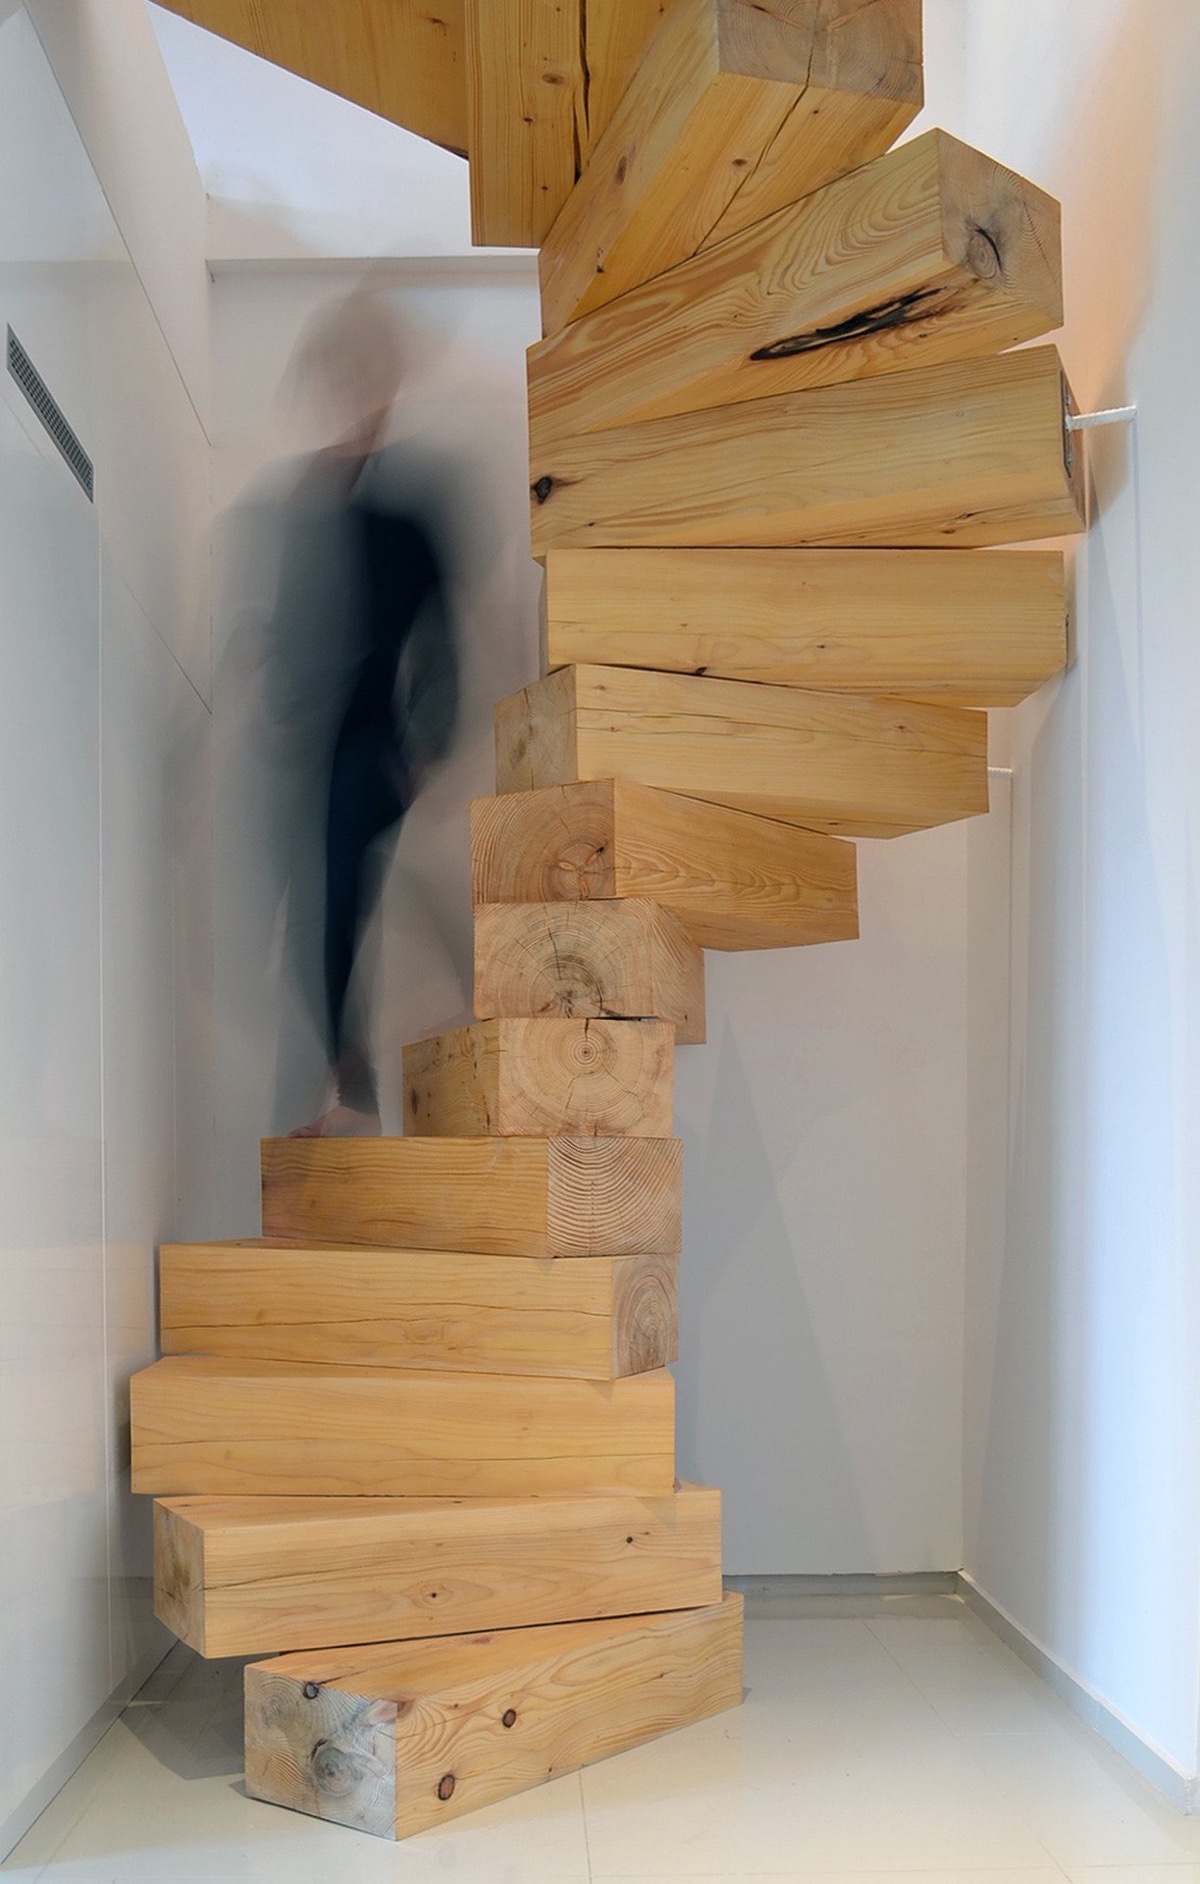 Work with what you have. Whether or not this staircase was built from actual architectural offcuts, this chunky tread staircase would make the perfect addition to a home filled with upcycled curiosities. The heavy wooden steps would also be at home in a modern rustic setting, or in an industrial vibe pad where raw concrete reins alongside a plethora of plants.